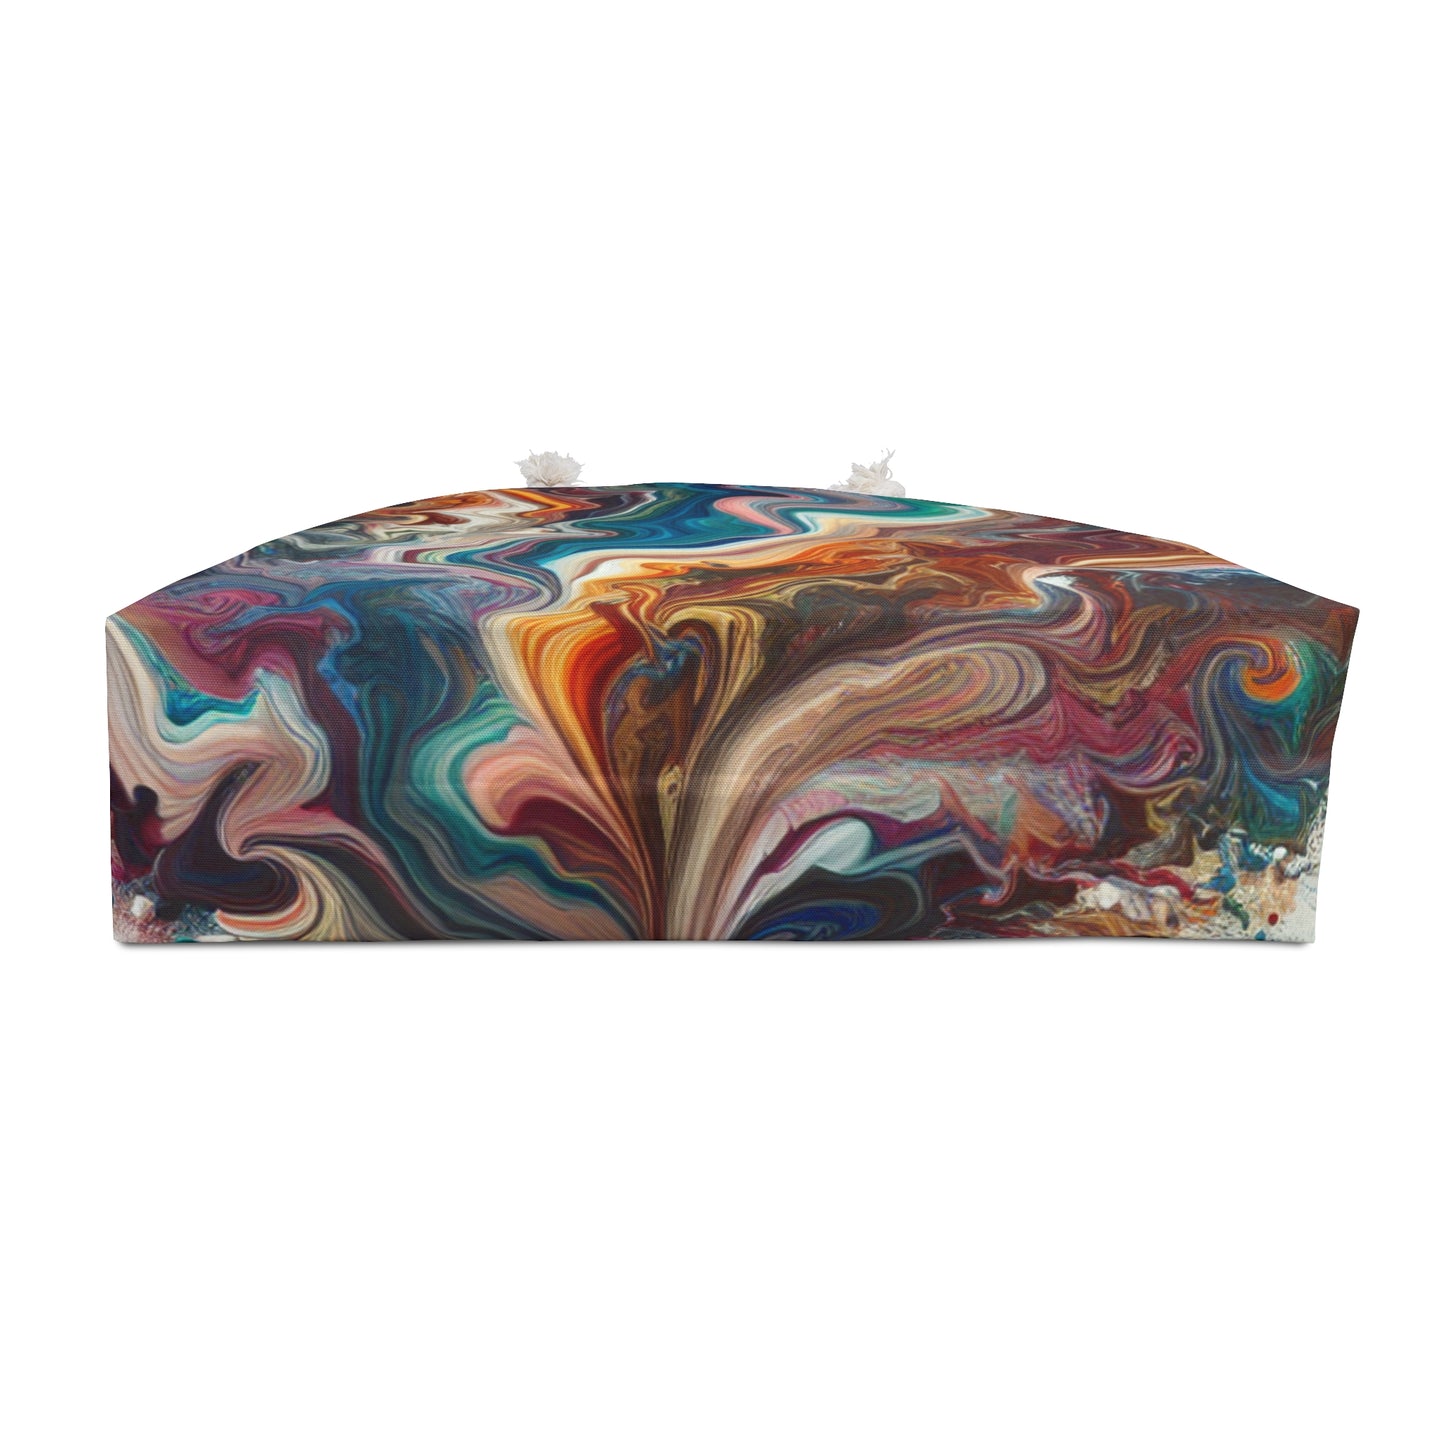 "A Paint Poured Paradise: Acrylic Pouring Art" - The Alien Weekender Bag Acrylic Pouring Style